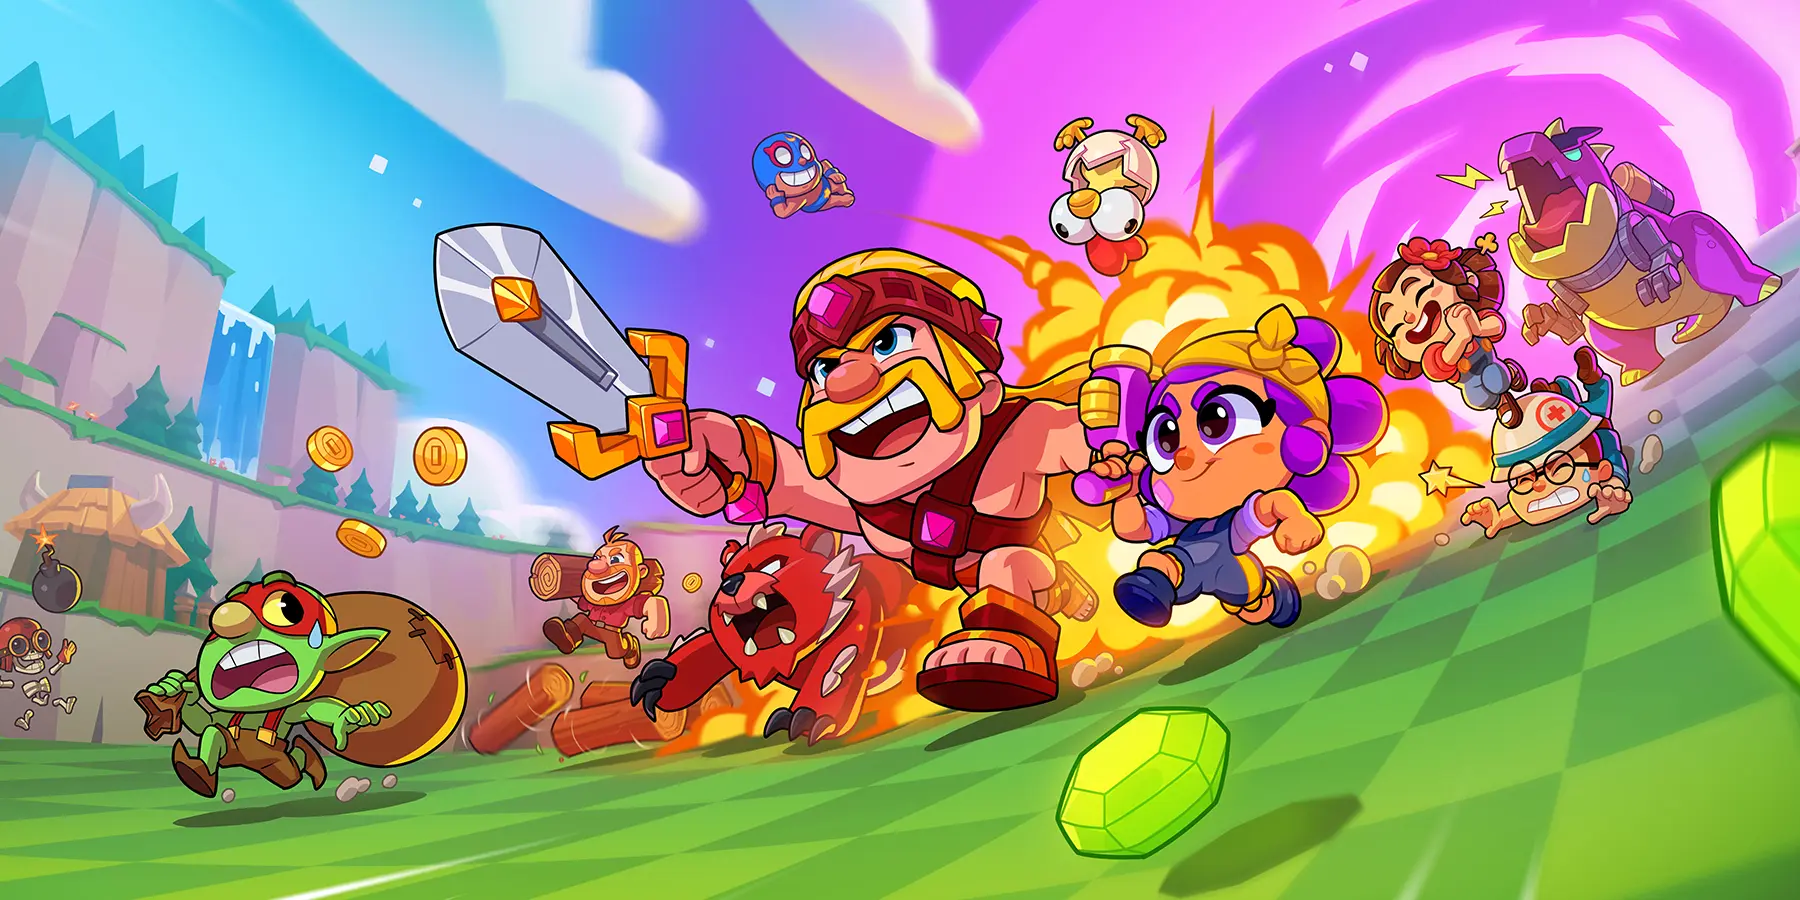 Squad Busters Pre-Registration: How to Register for Supercell’s New Action Game